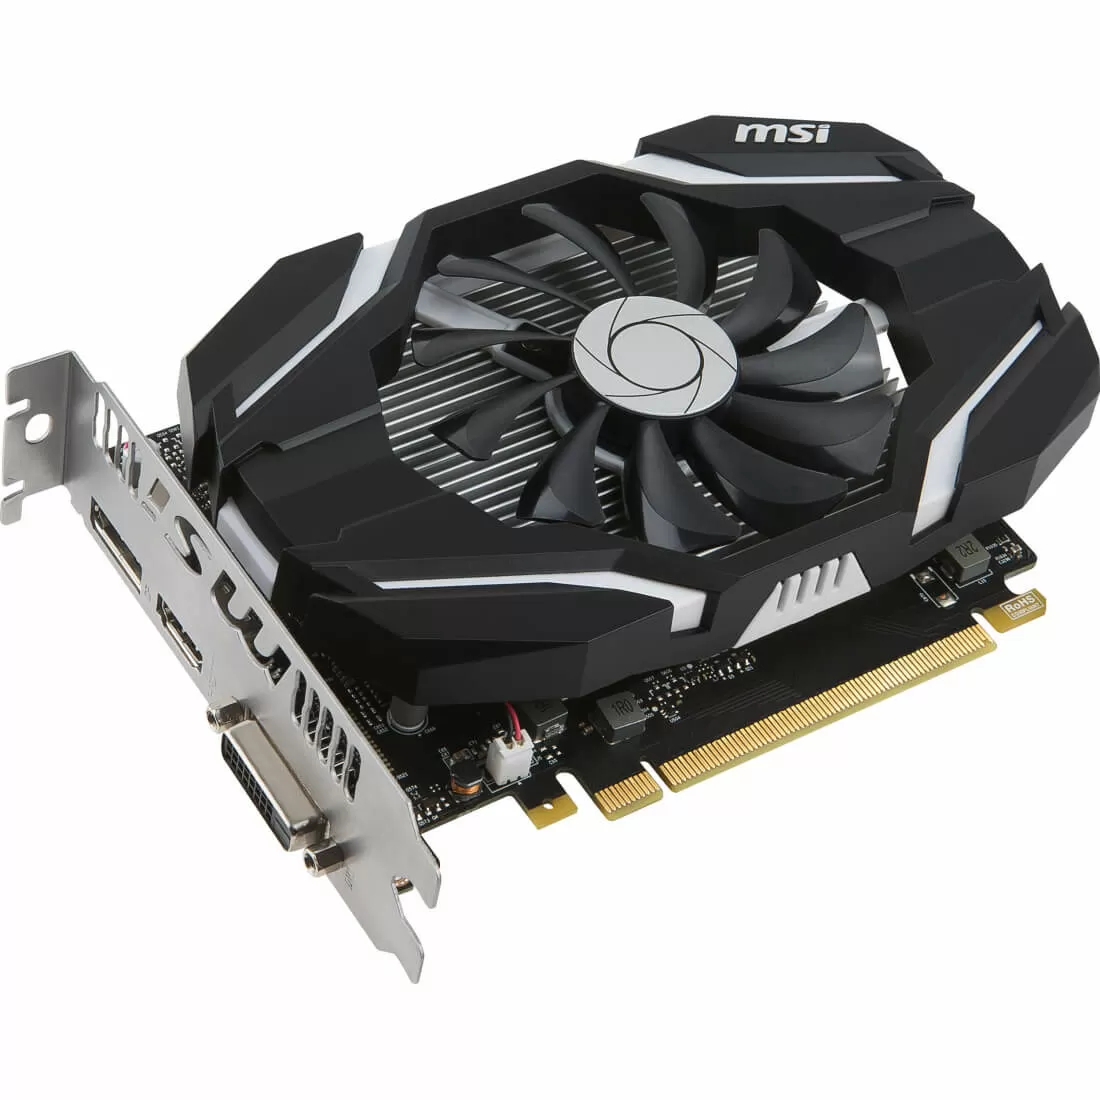 MSI GeForce GTX 1050 2G OC 2GB GDDR5 PCIe Reviews, Pros and Cons 